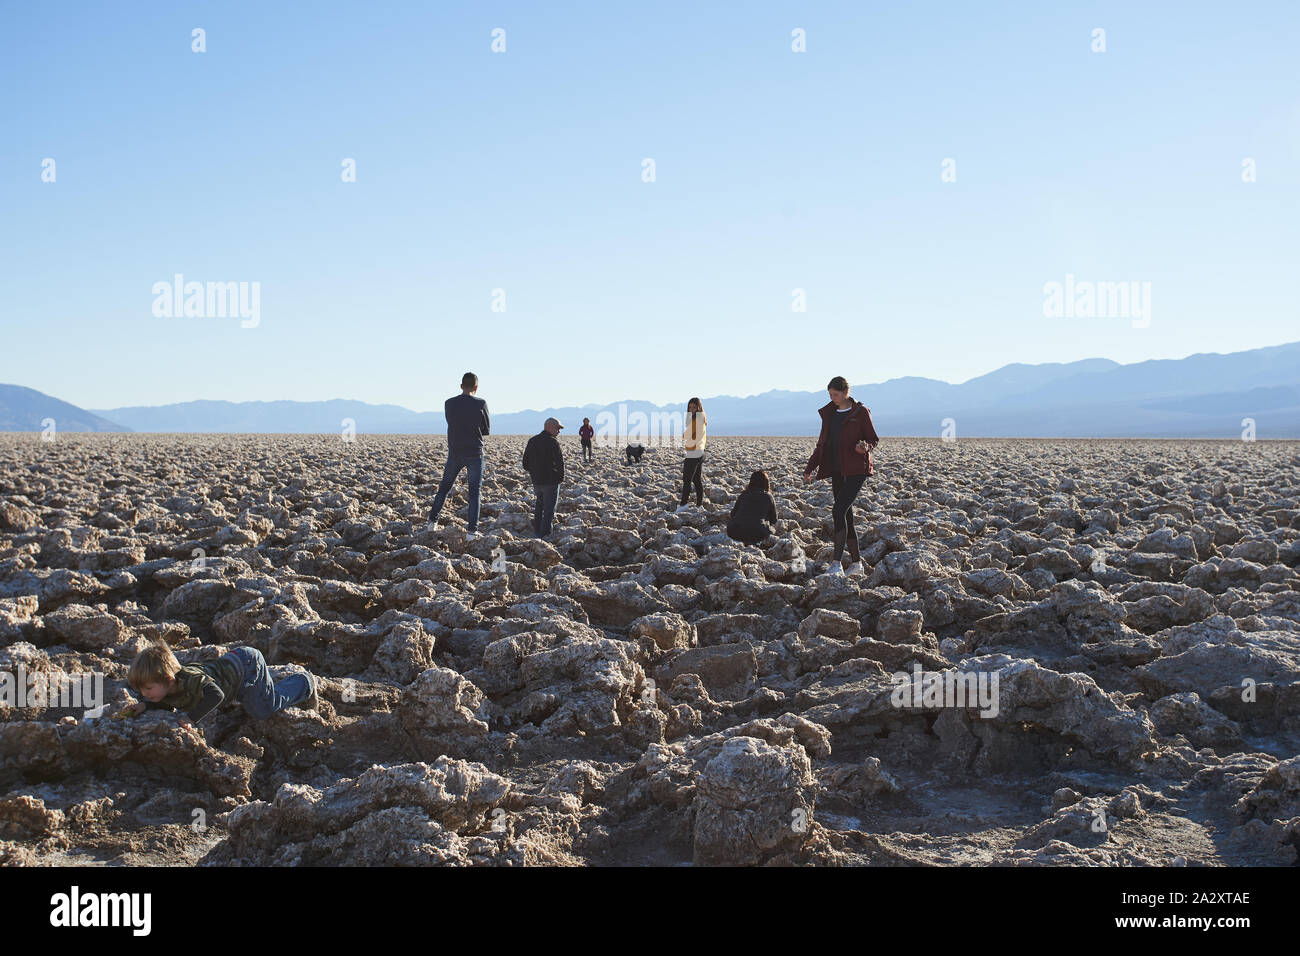 Visitors explore Devil's Golf Course, a large salt pan on the floor of Death Valley in California on Wednesday, Jan 2, 2019. Stock Photo